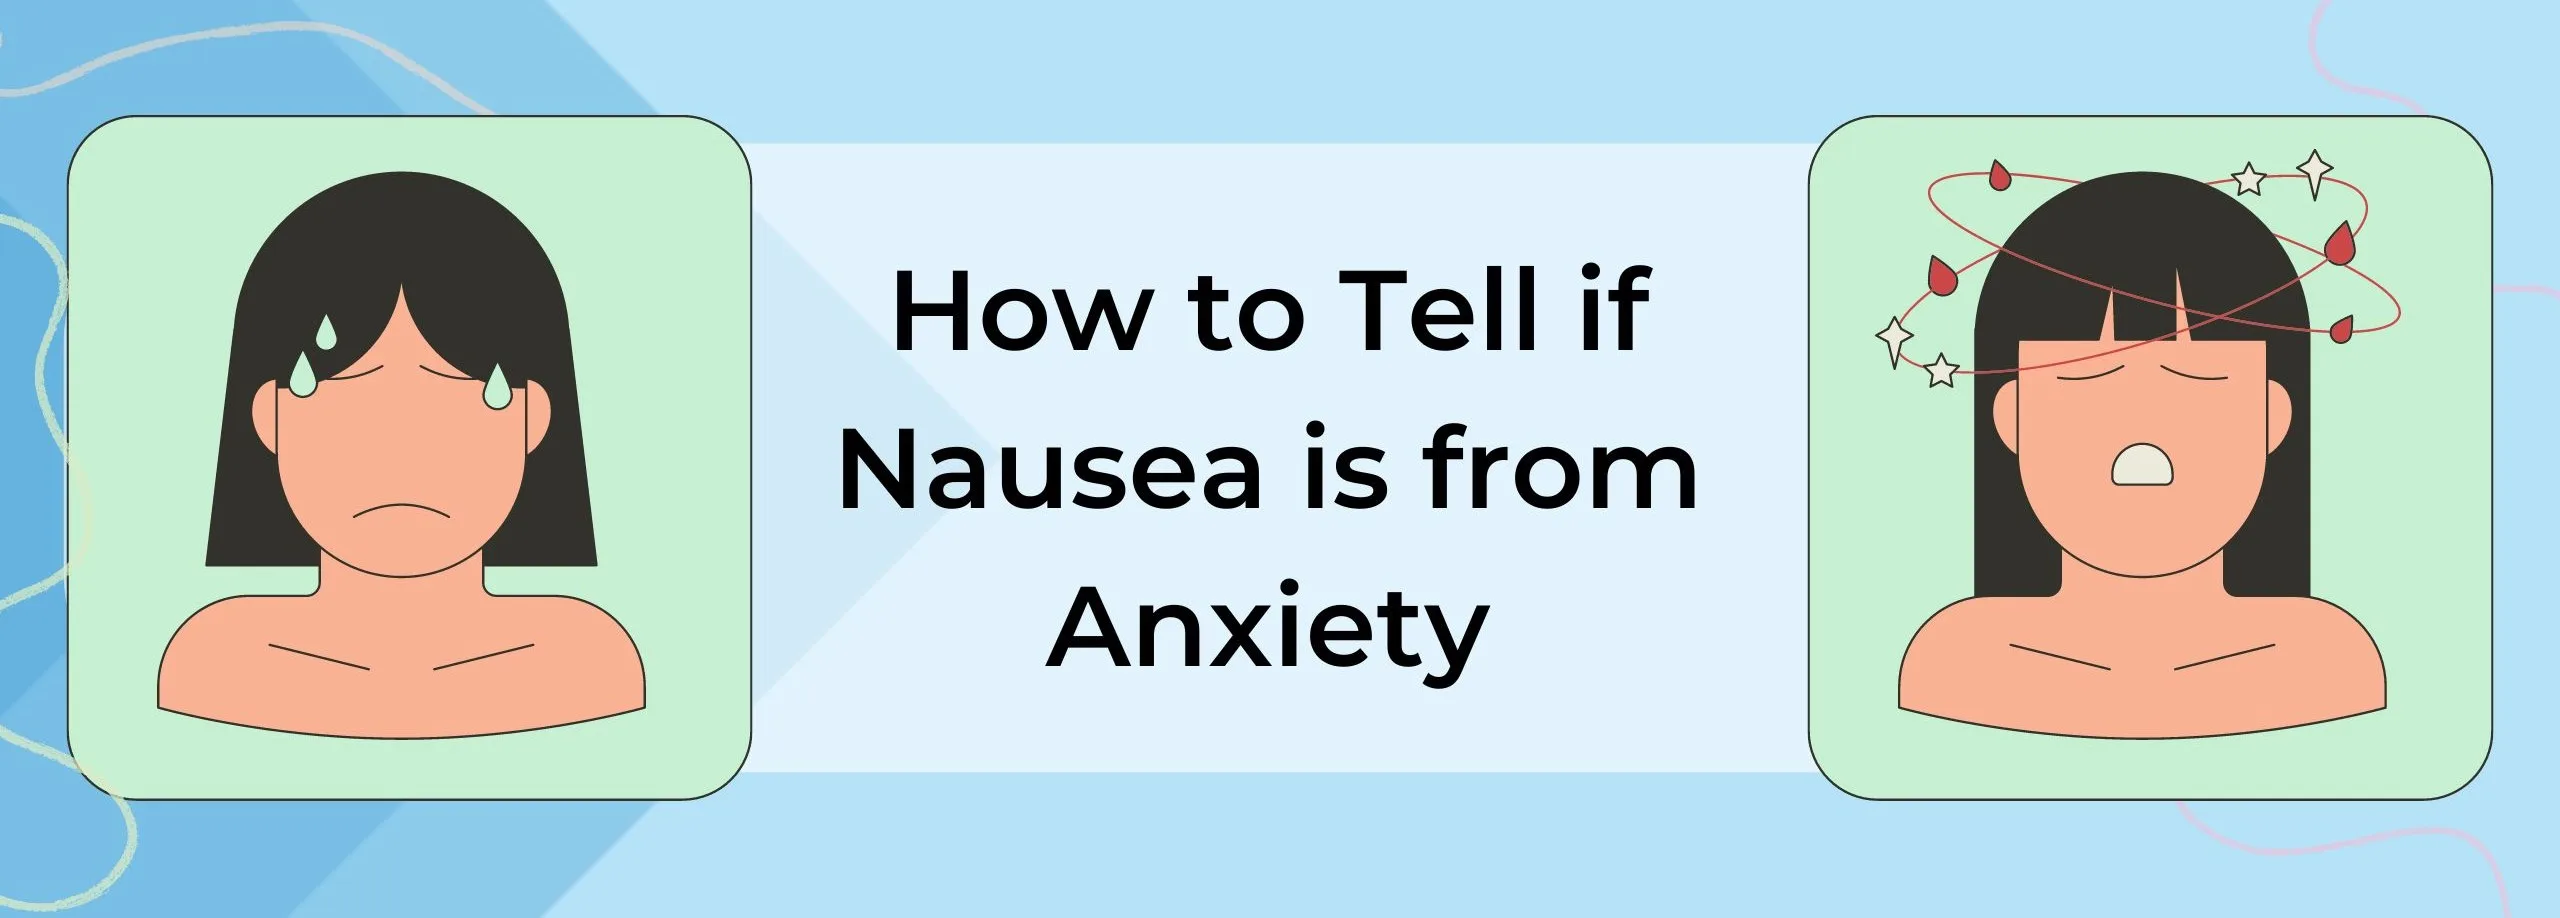 nausea from anxiety